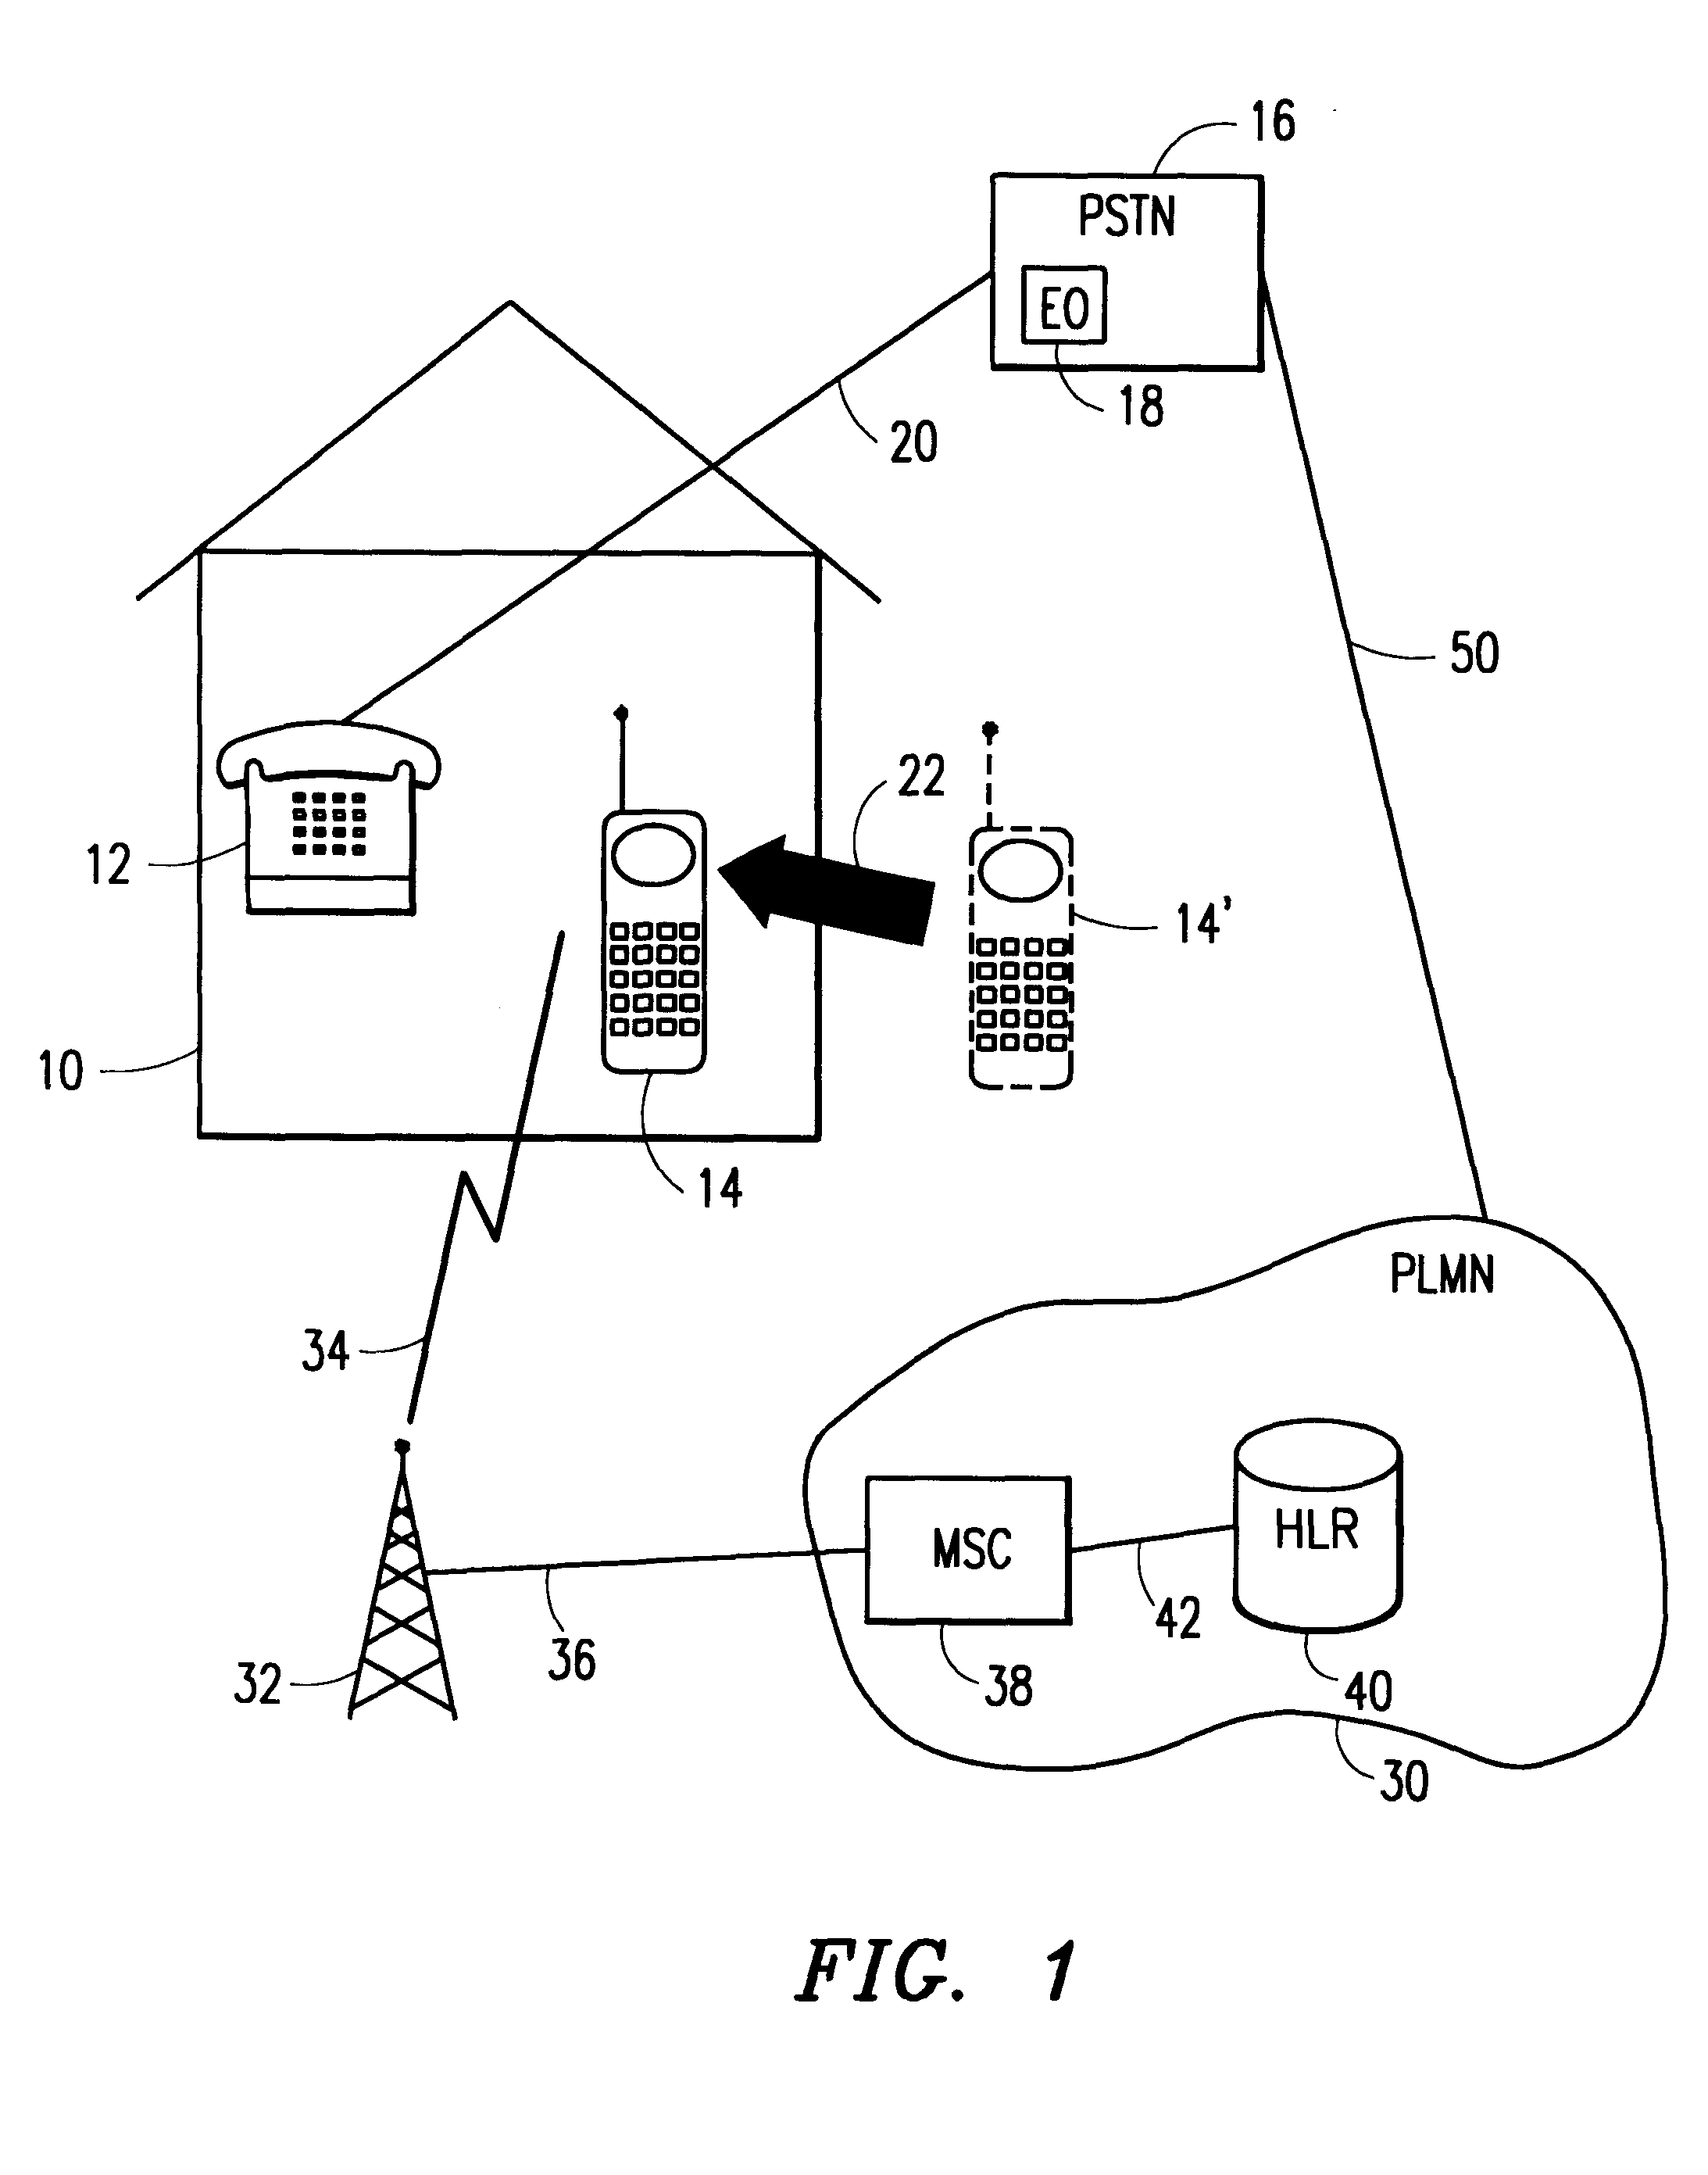 System, method and apparatus for automatic feature activation/deactivation based upon positioning